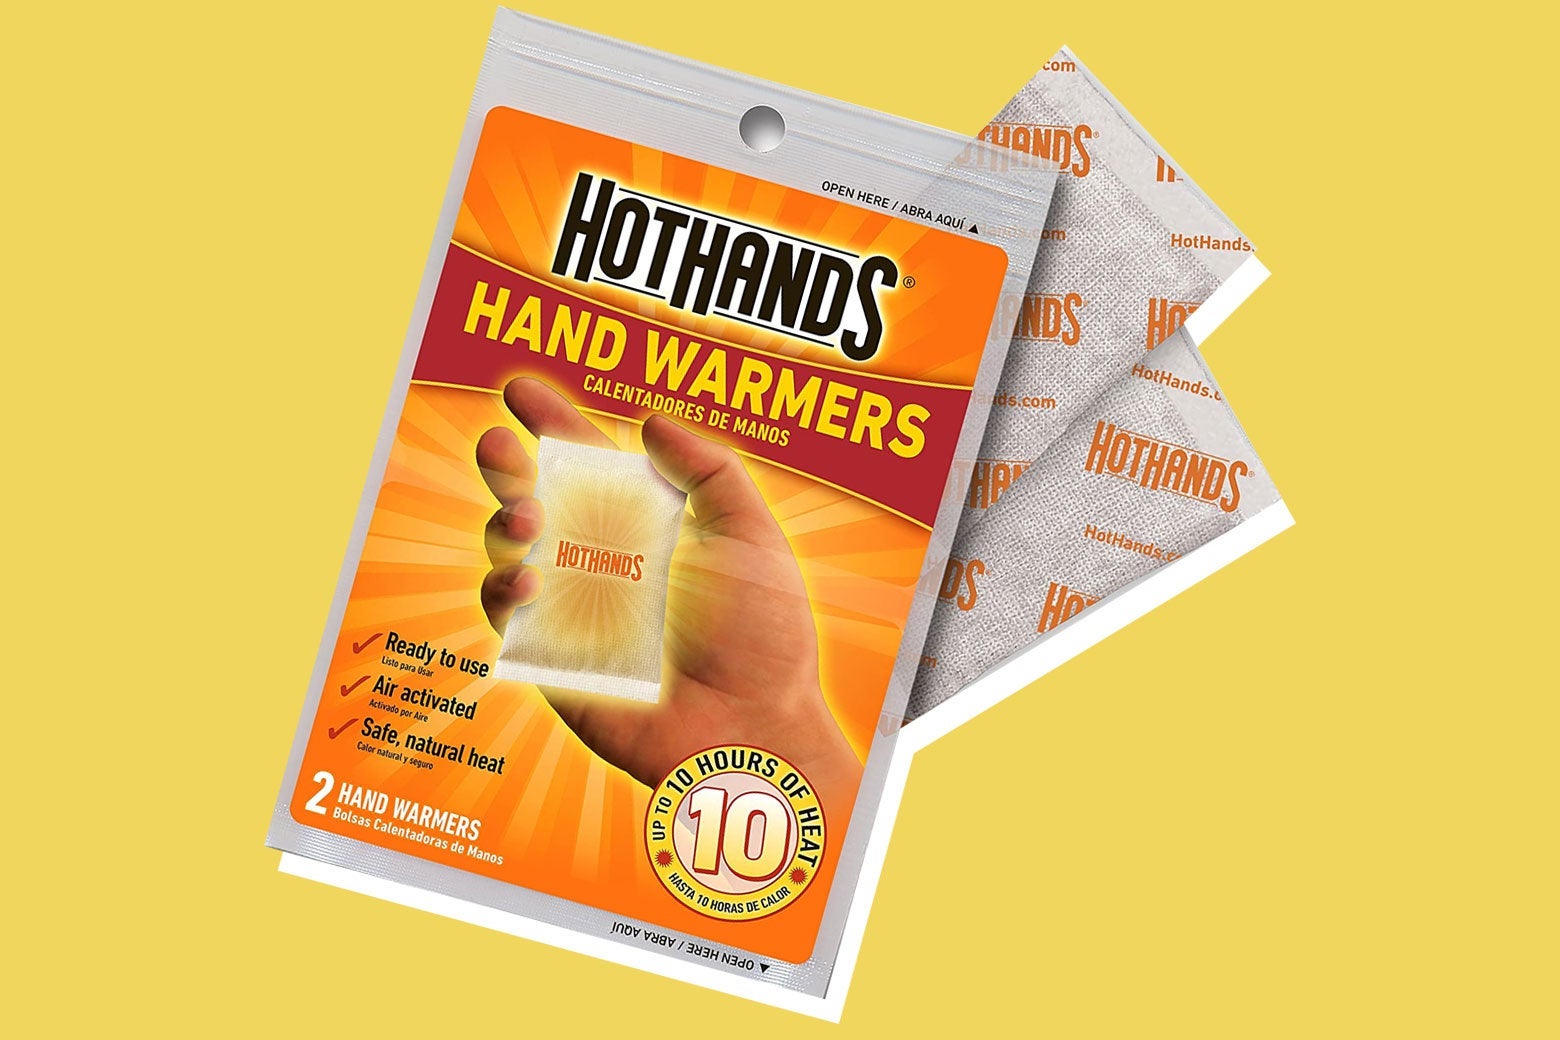 Packet of hand warmers